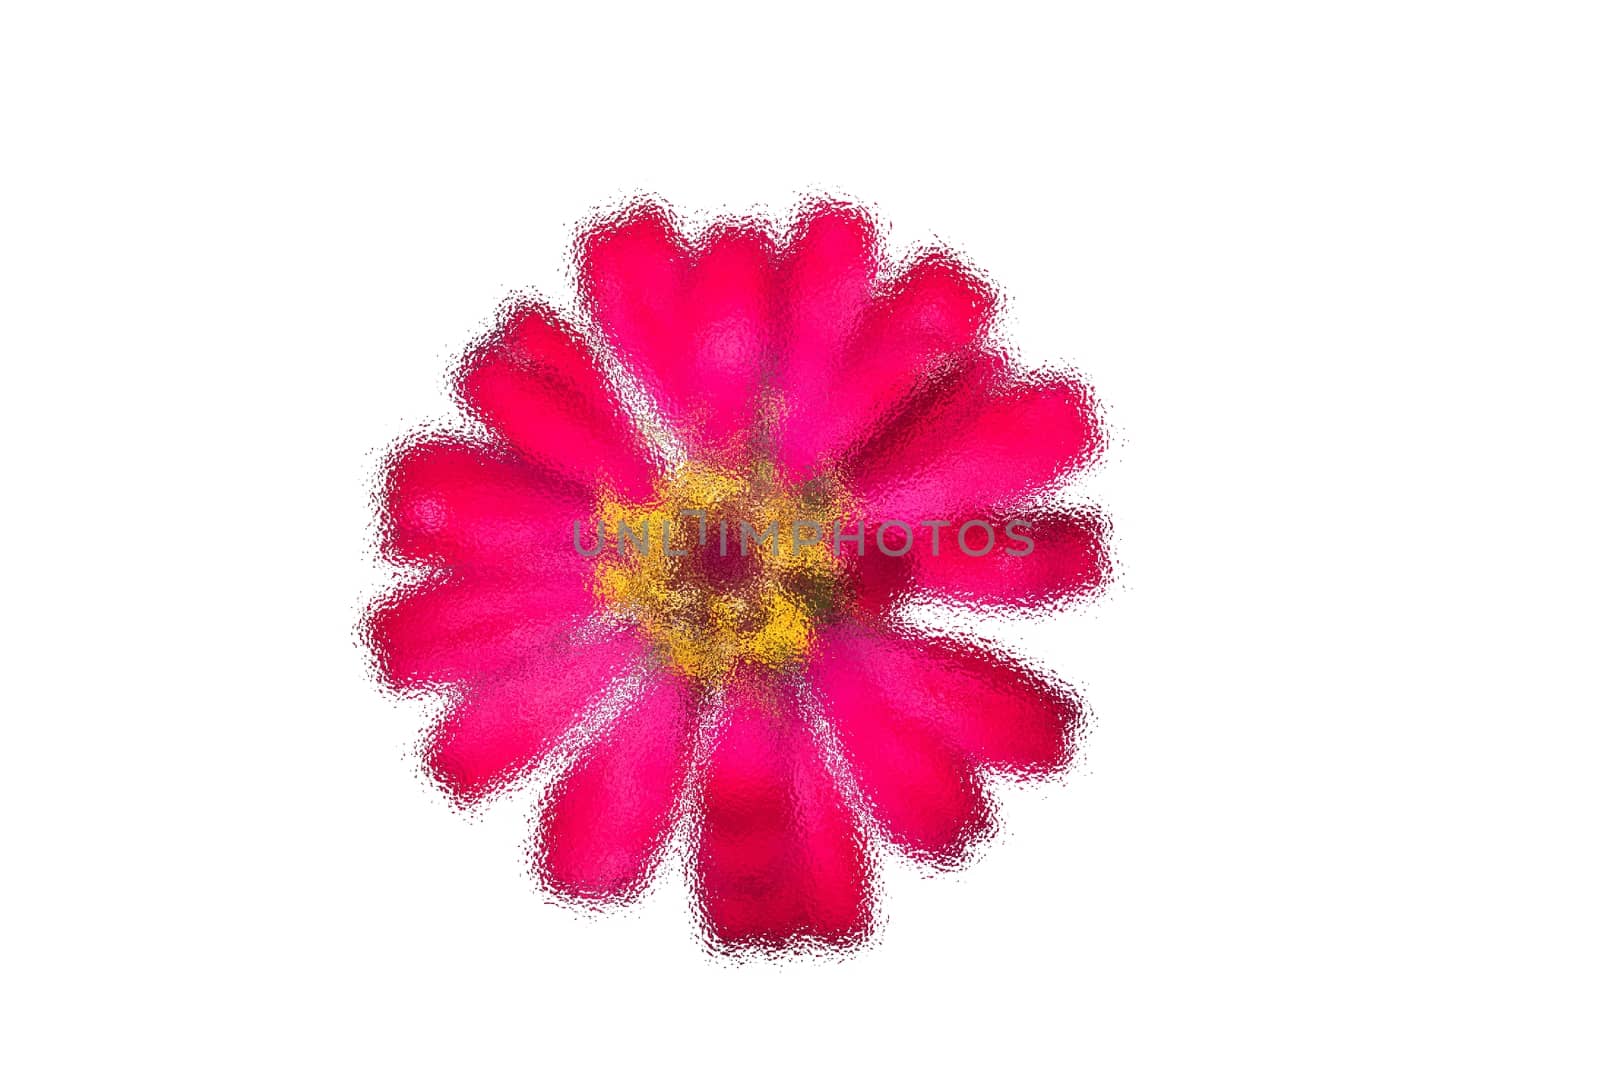 The Abstract frosted glass image on Beautiful Pink flower of zinnia isolated on white background.